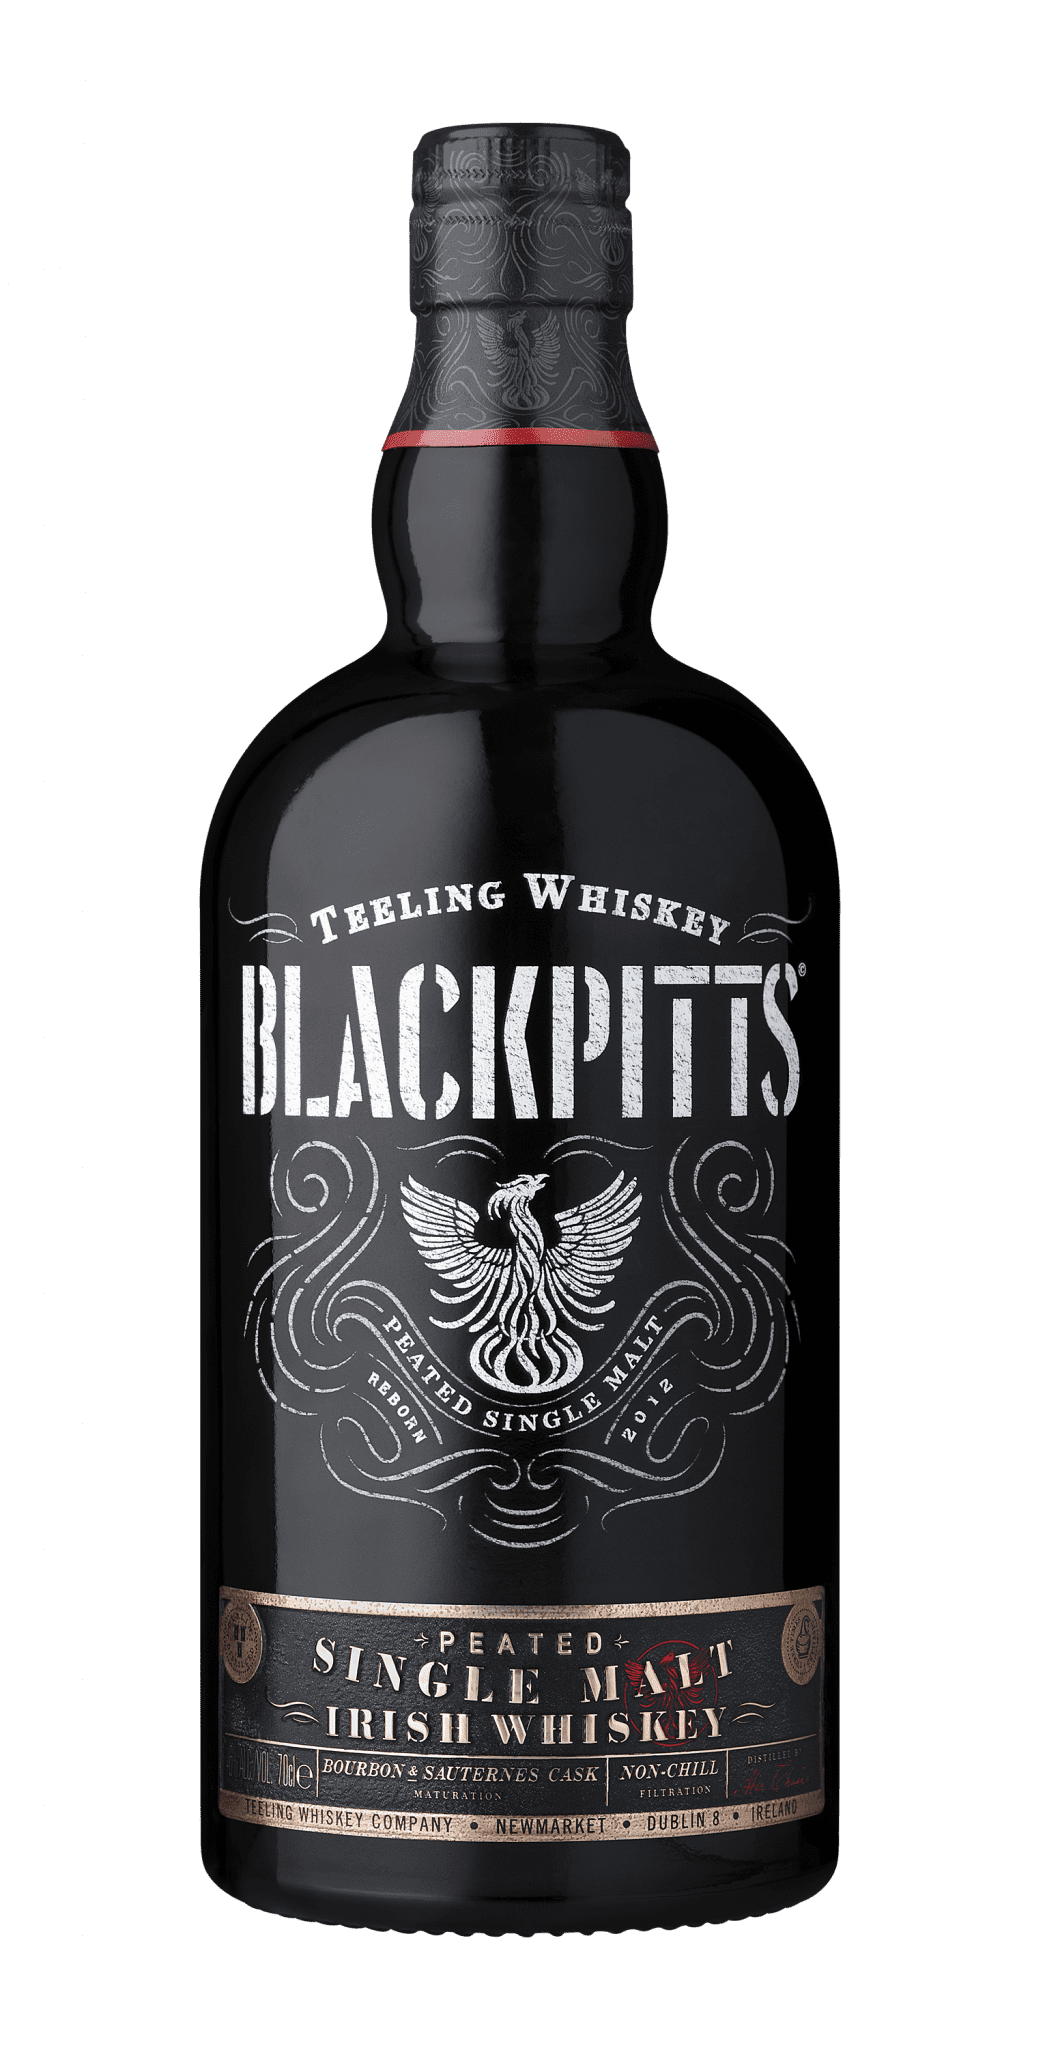 Teeling Blackpitts Single Malt Irish Whiskey Whiskey Blogger Stuart McNamaranbsp- Teeling Whiskey Unveils Blackpitts Irish Whiskey First Dublin Distilled Peated Single Malt Blackpitts is the second release from their new Dublin Distillery and continues its unconventional approach to expanding the Irish whiskey category Read More at Whiskey Blogger - International Whiskey Reviews by Irish Whiskey Blogger Stuart McNamara